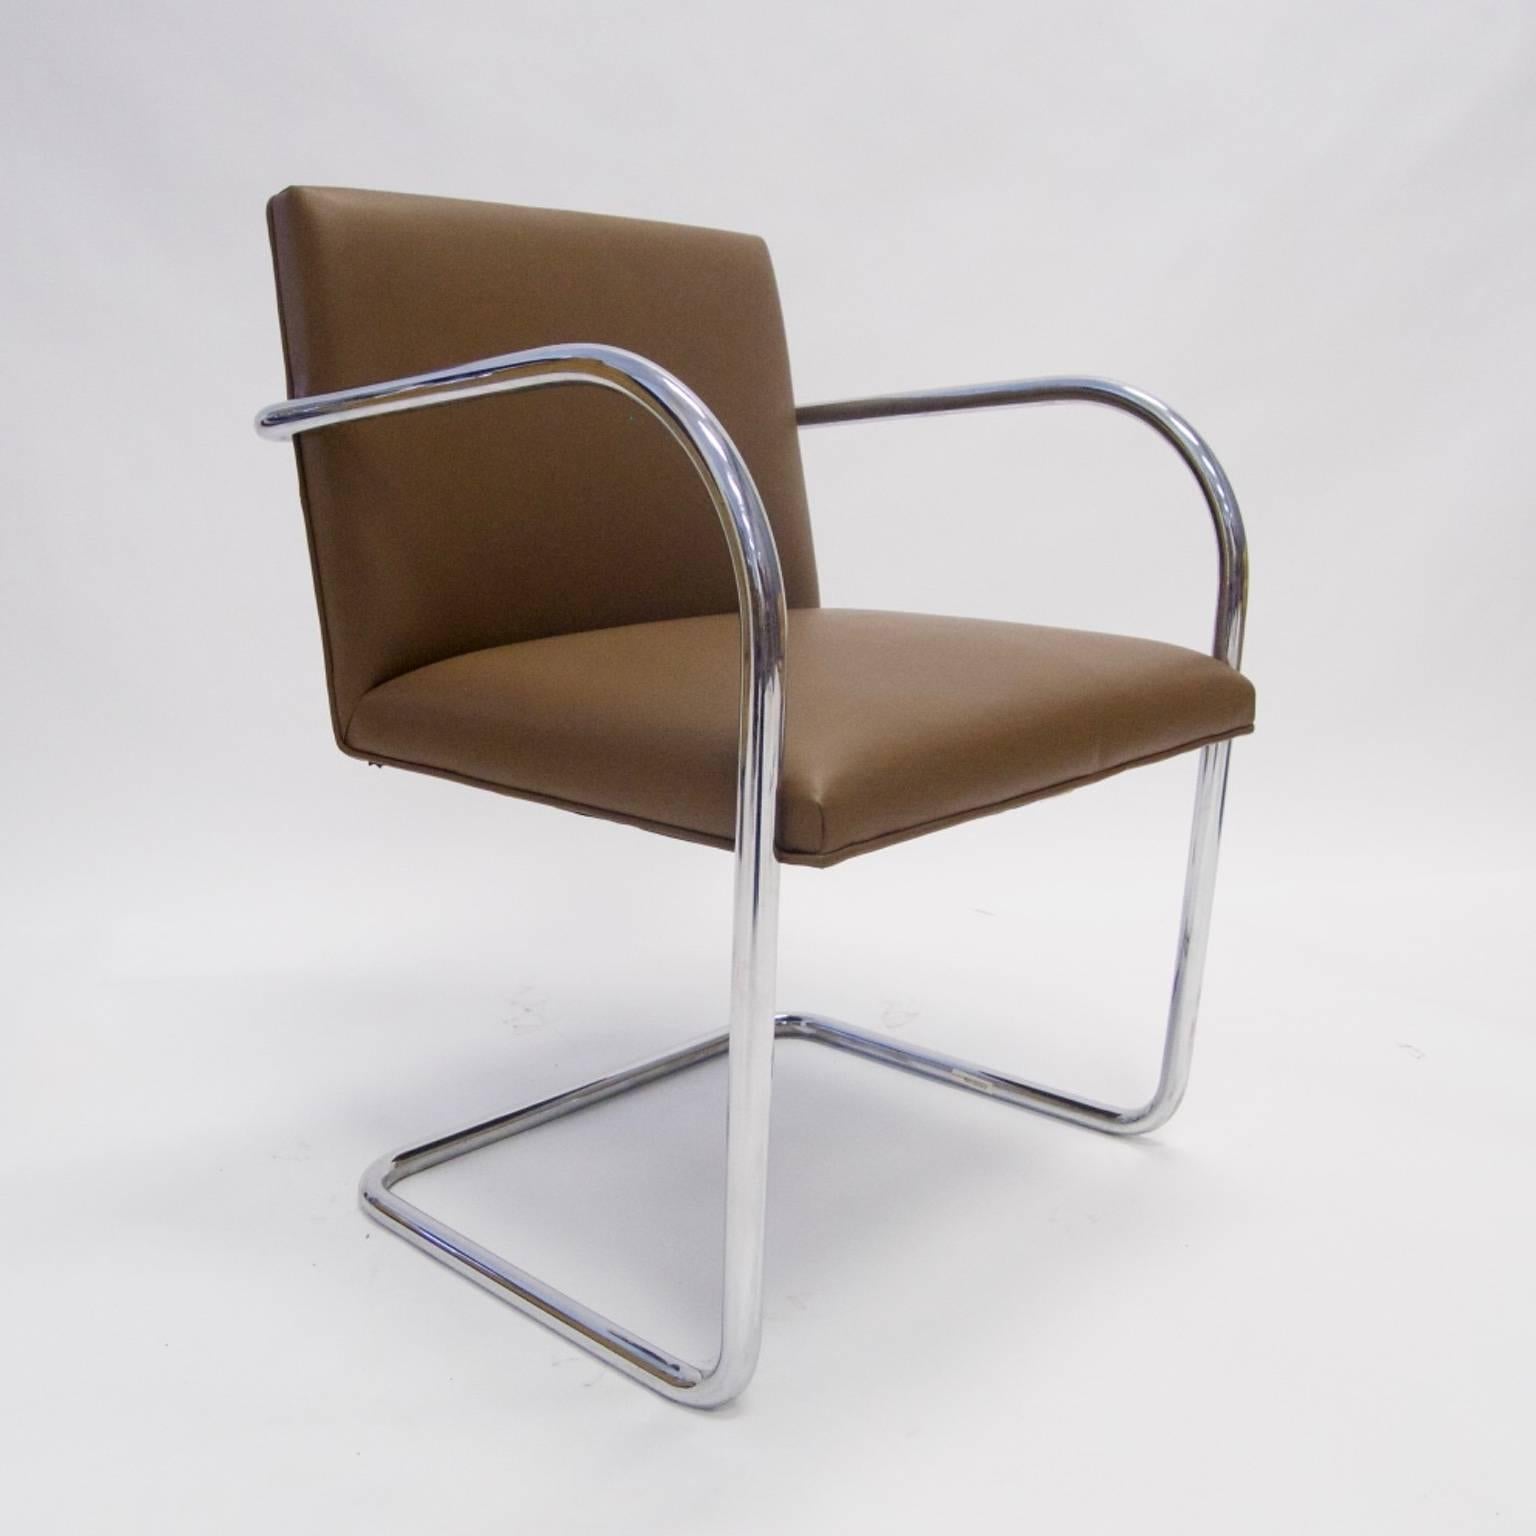 20th Century Mies van der Rohe Brno Tubular Lounge Chair in Leather